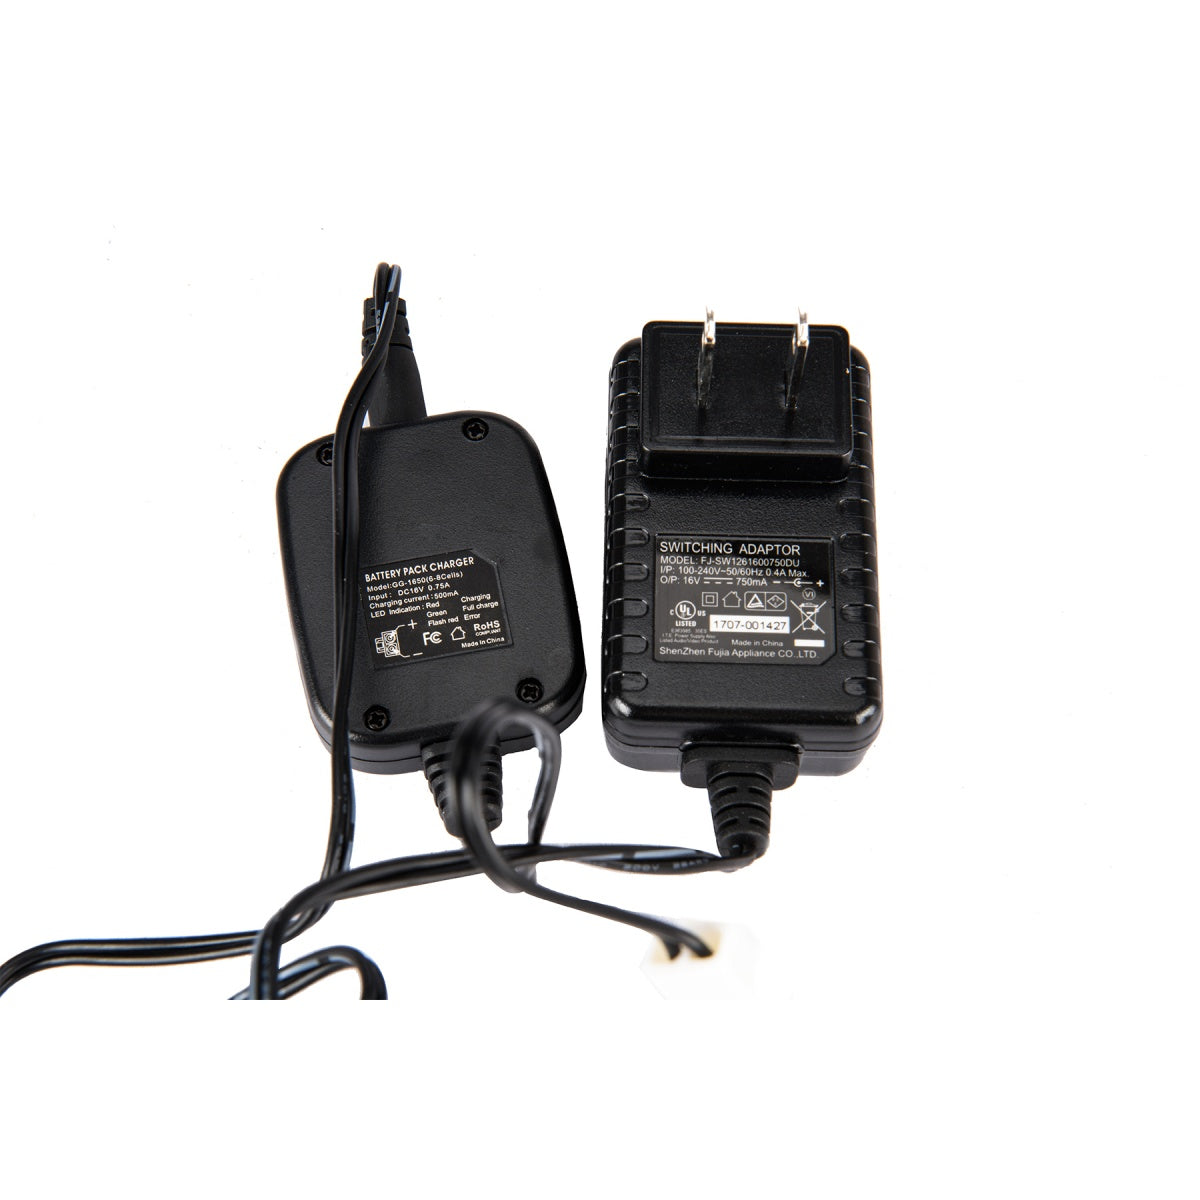 G&G ARMAMENT 16V 0.4A NIMH BATTERY CHARGER FOR AEG